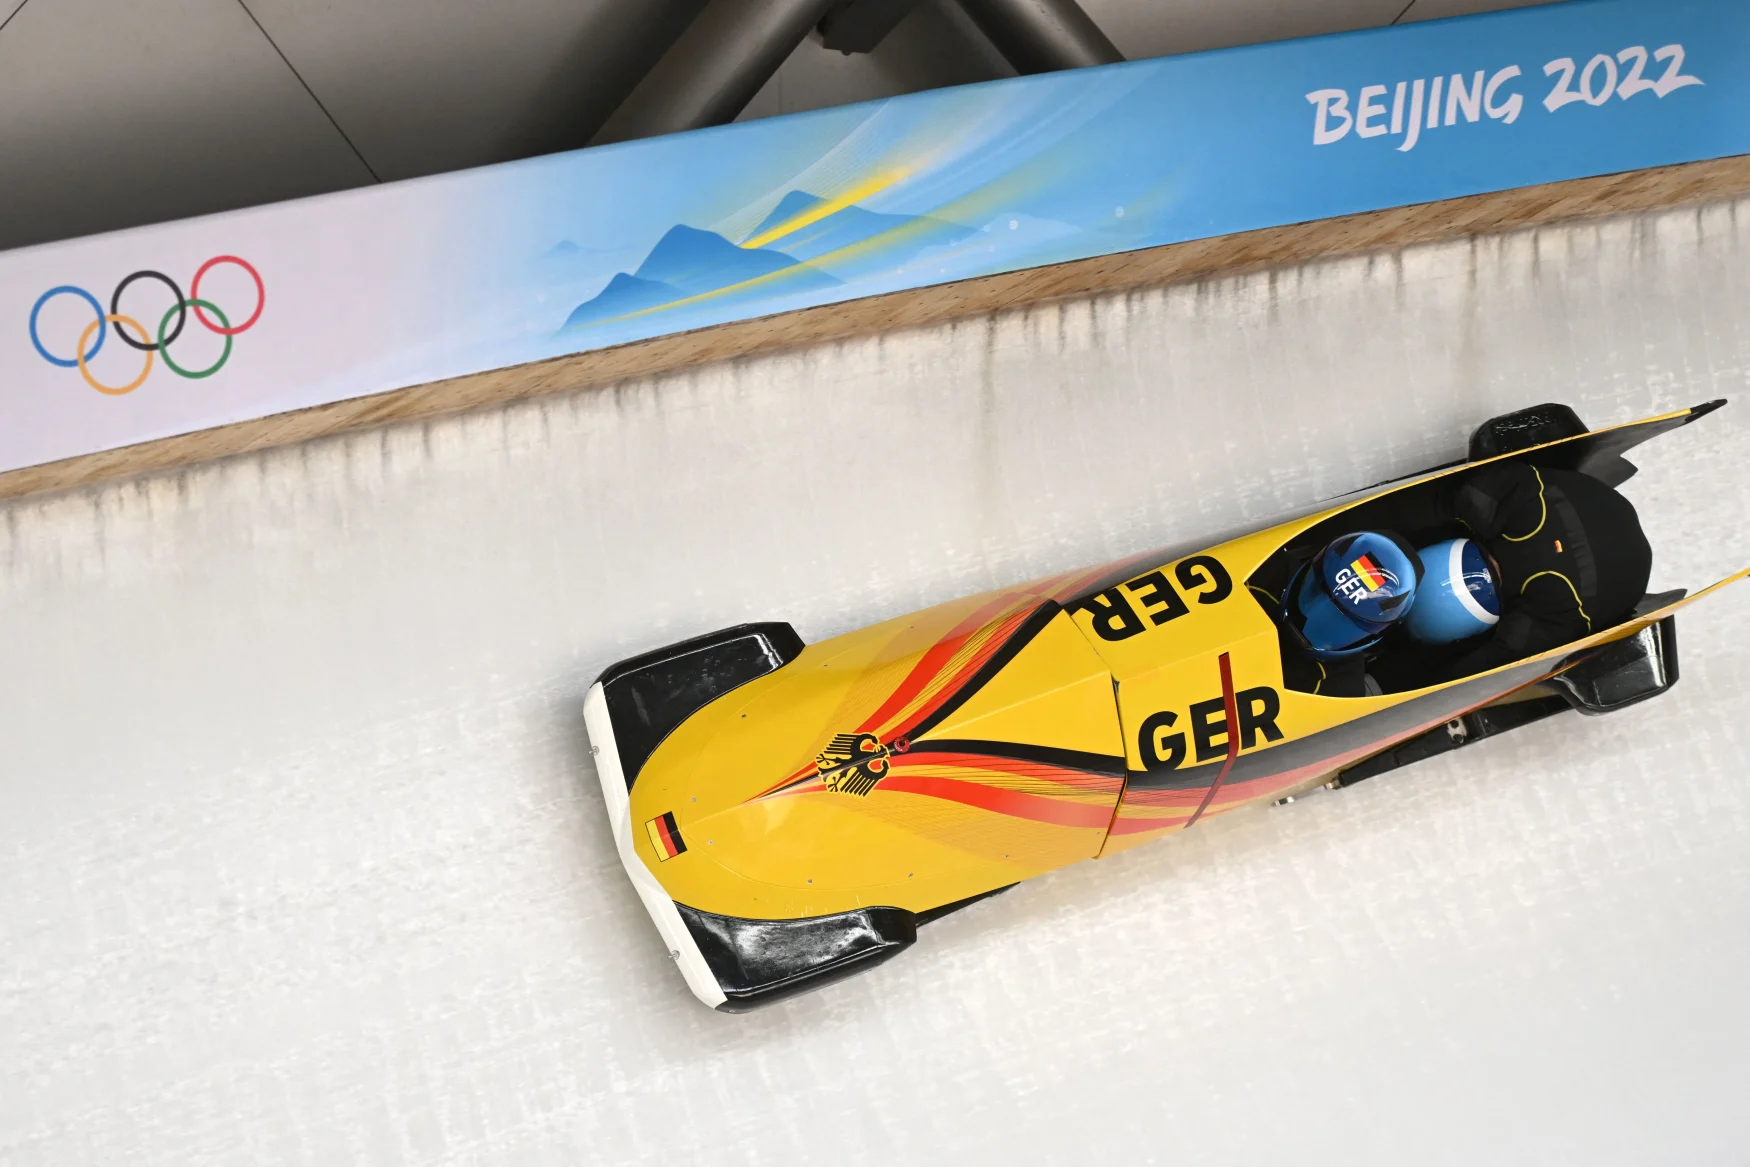 Germany's bobsleigh team members practice at the Yanqing National Sliding Centre in Yanqing district on February 2, 2022, ahead of the Beijing 2022 Winter Olympic Games. (Photo by Daniel MIHAILESCU / AFP) (Photo by DANIEL MIHAILESCU/AFP via Getty Images)